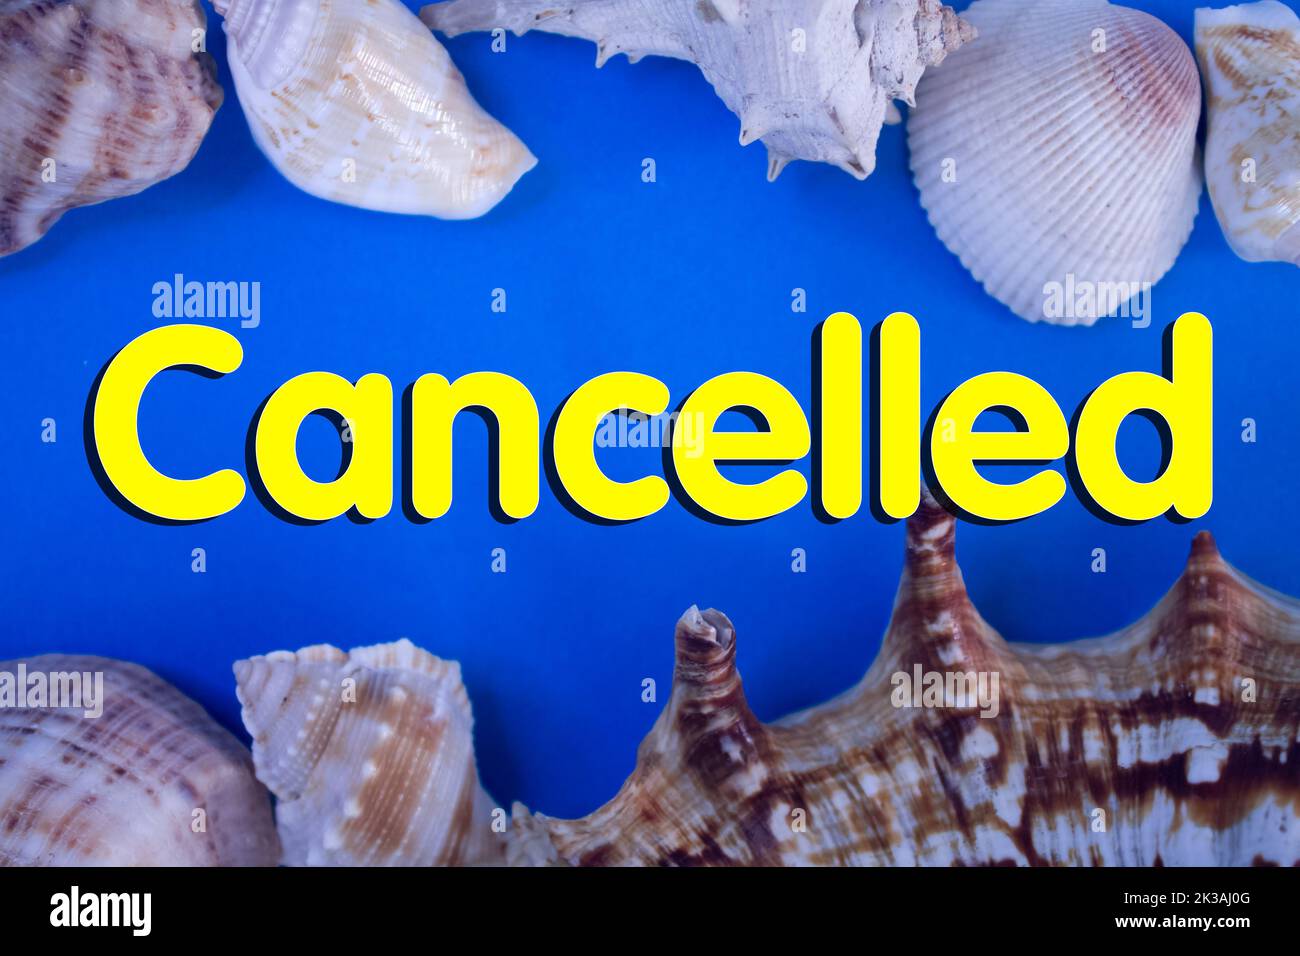 Animal Shell, Summer vacation, marine background with Cancelled text. Stock Photo